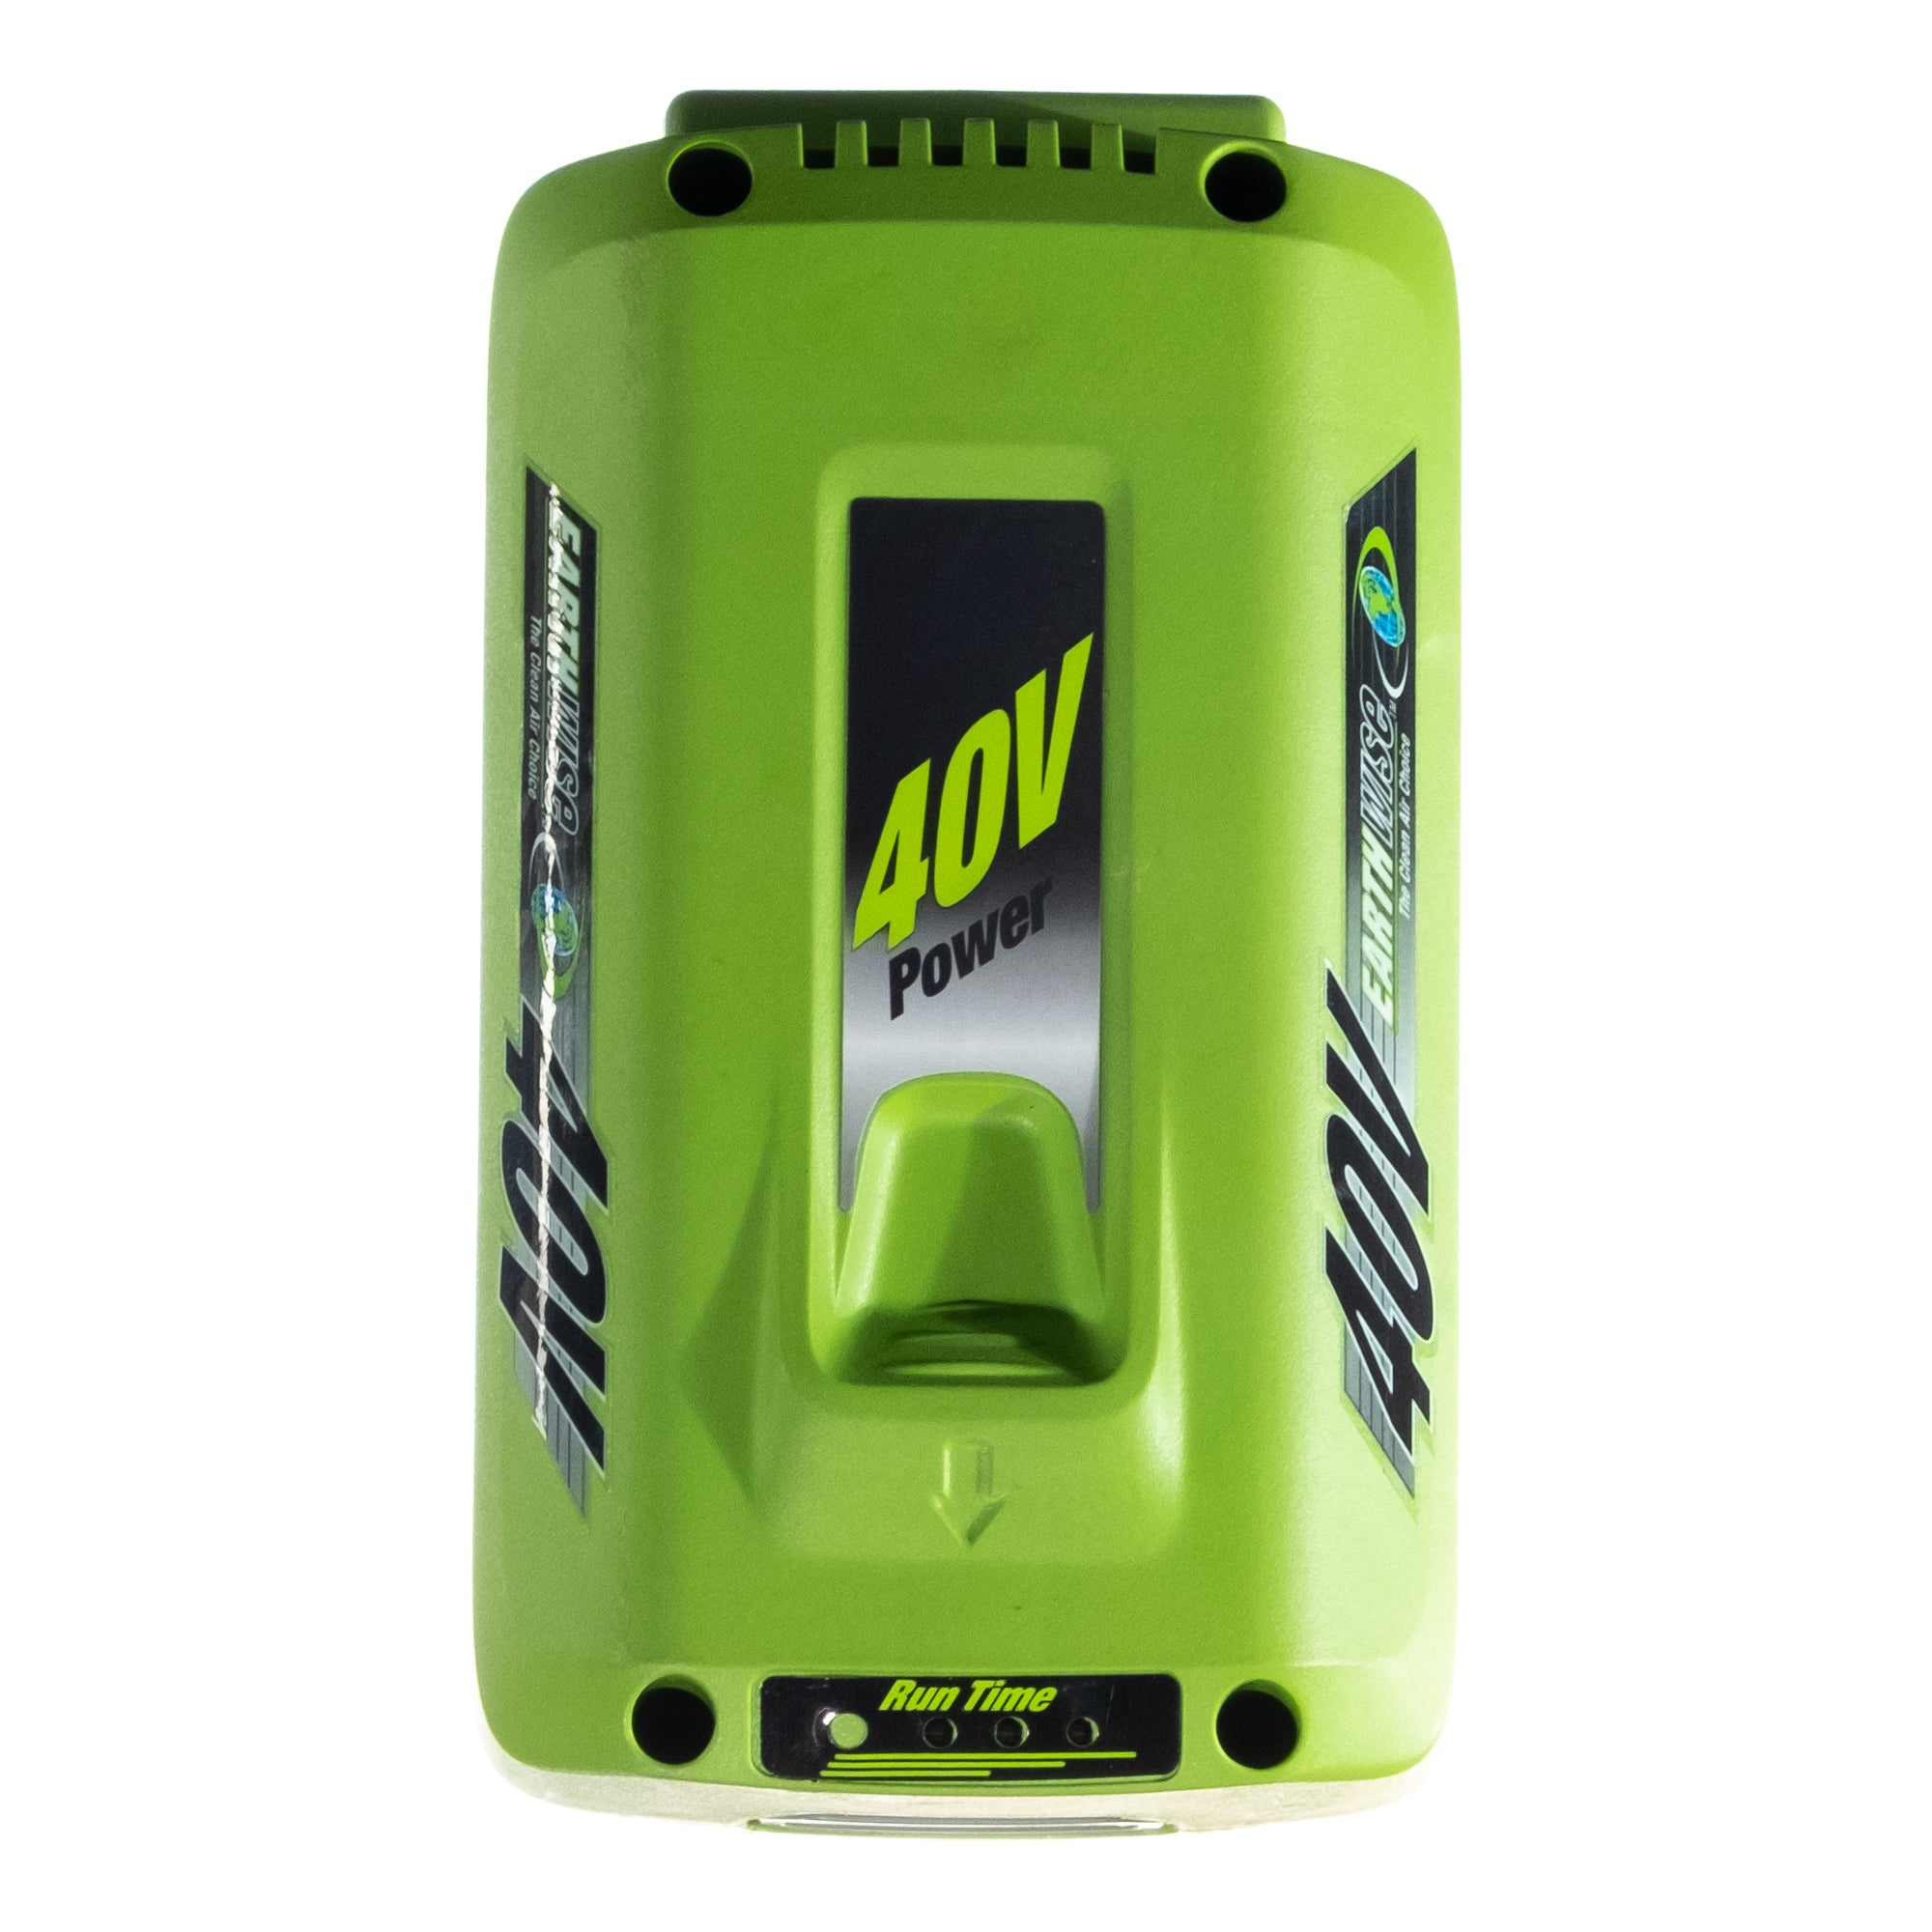 Half Off Earthwise 40V 2Ah Lithium Battery at a discounted price of 61%